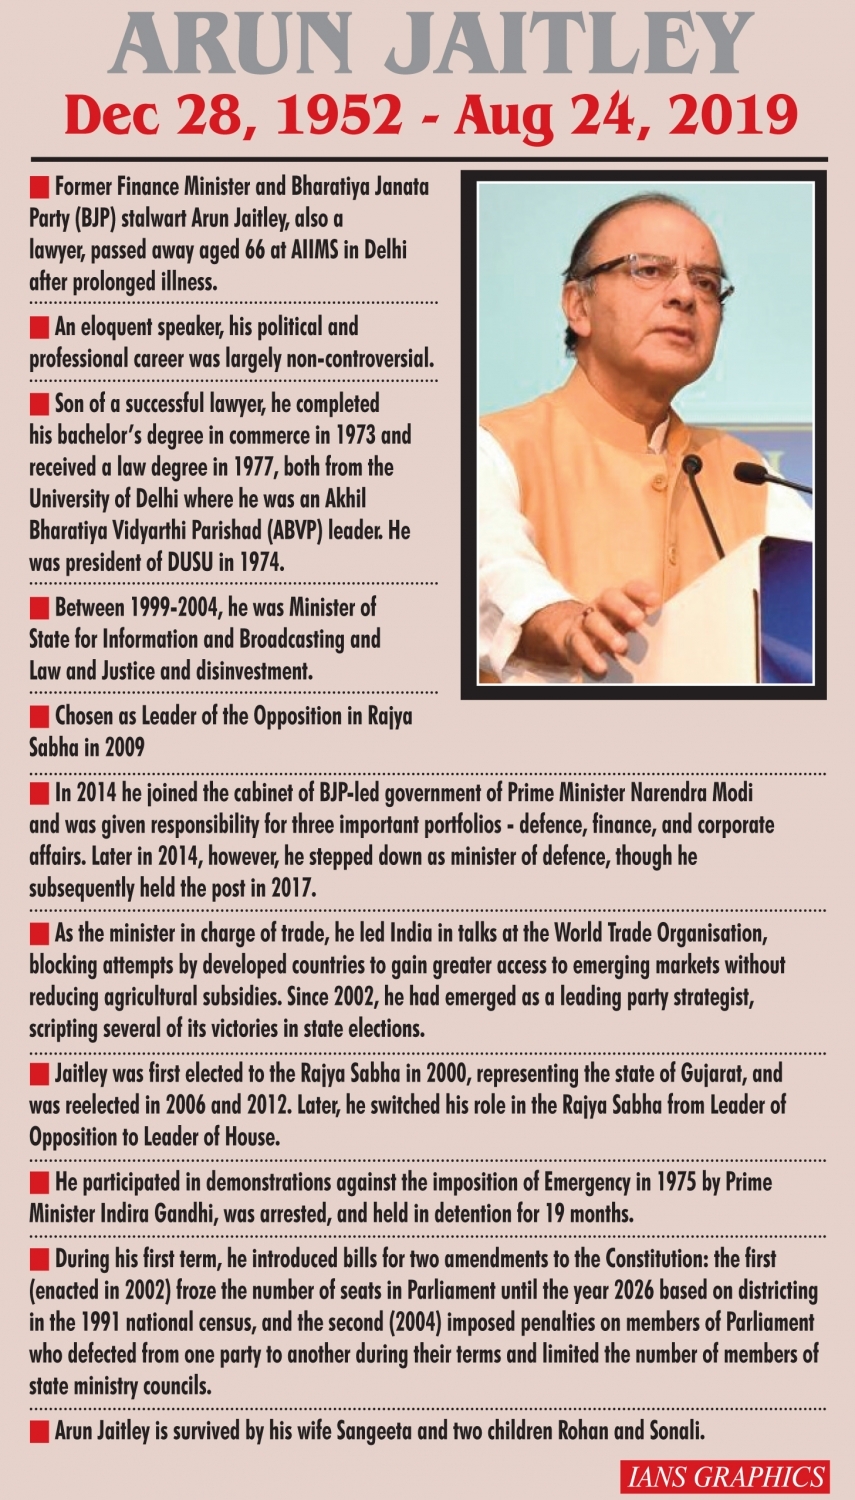 Arun Jaitley leaves behind a rich and chequered legacy